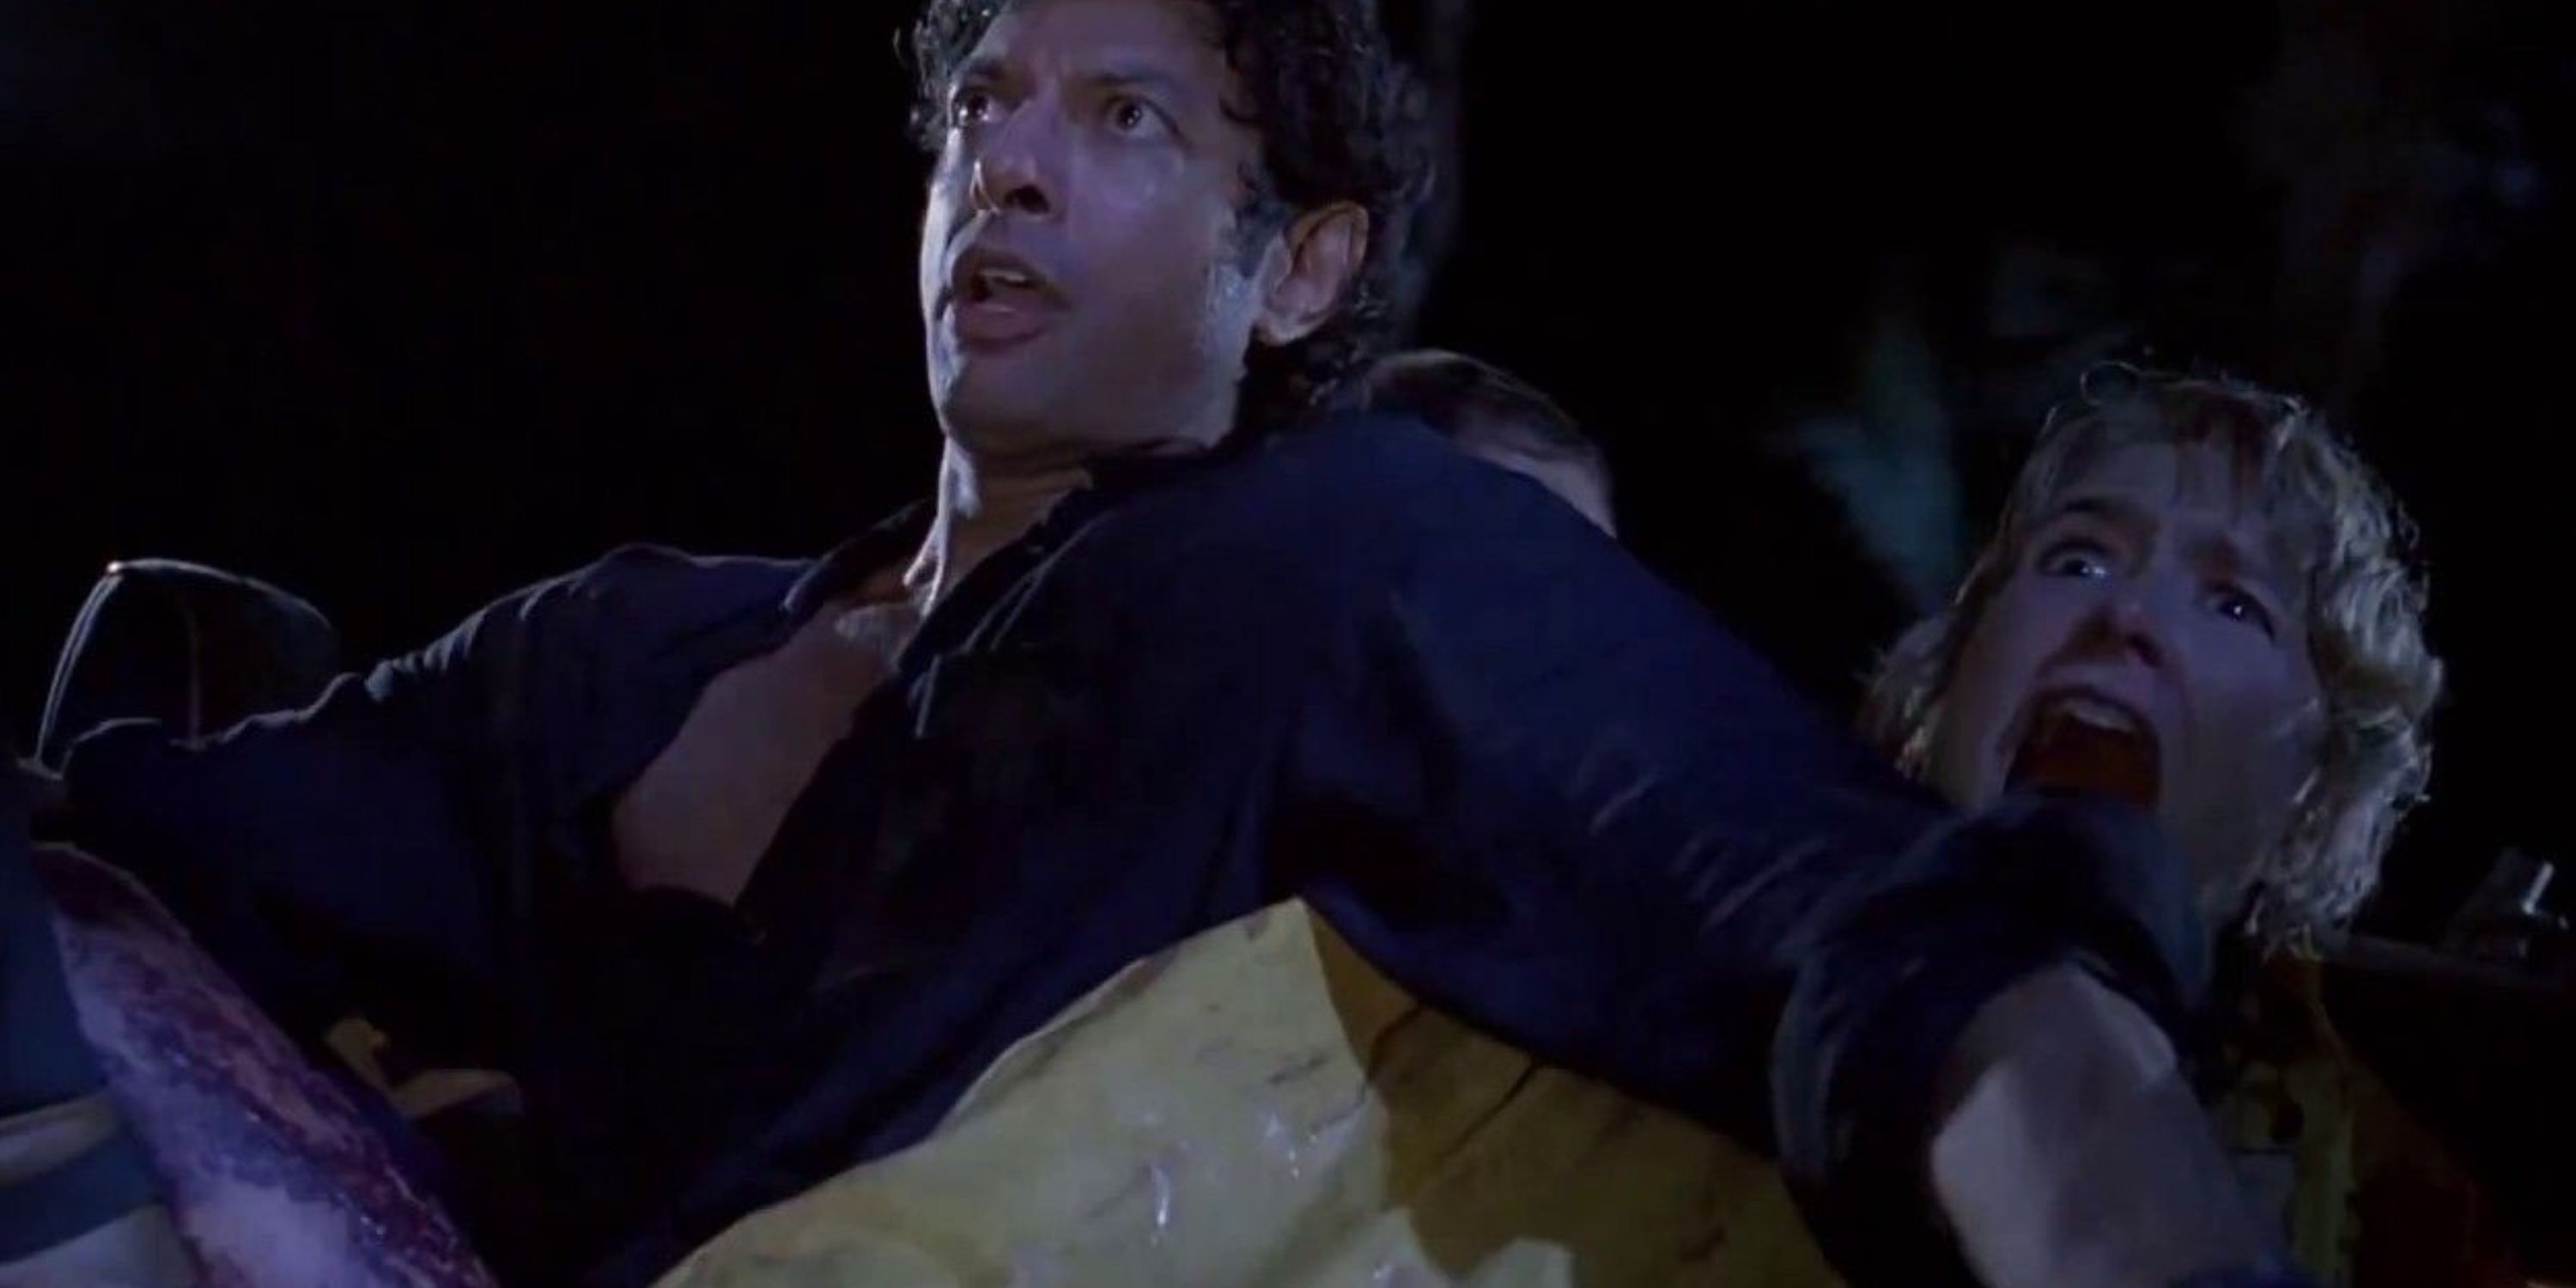 Ian Malcolm and Ellie Sattler reacting to the T.Rex in the back of the jeep in Jurassic Park